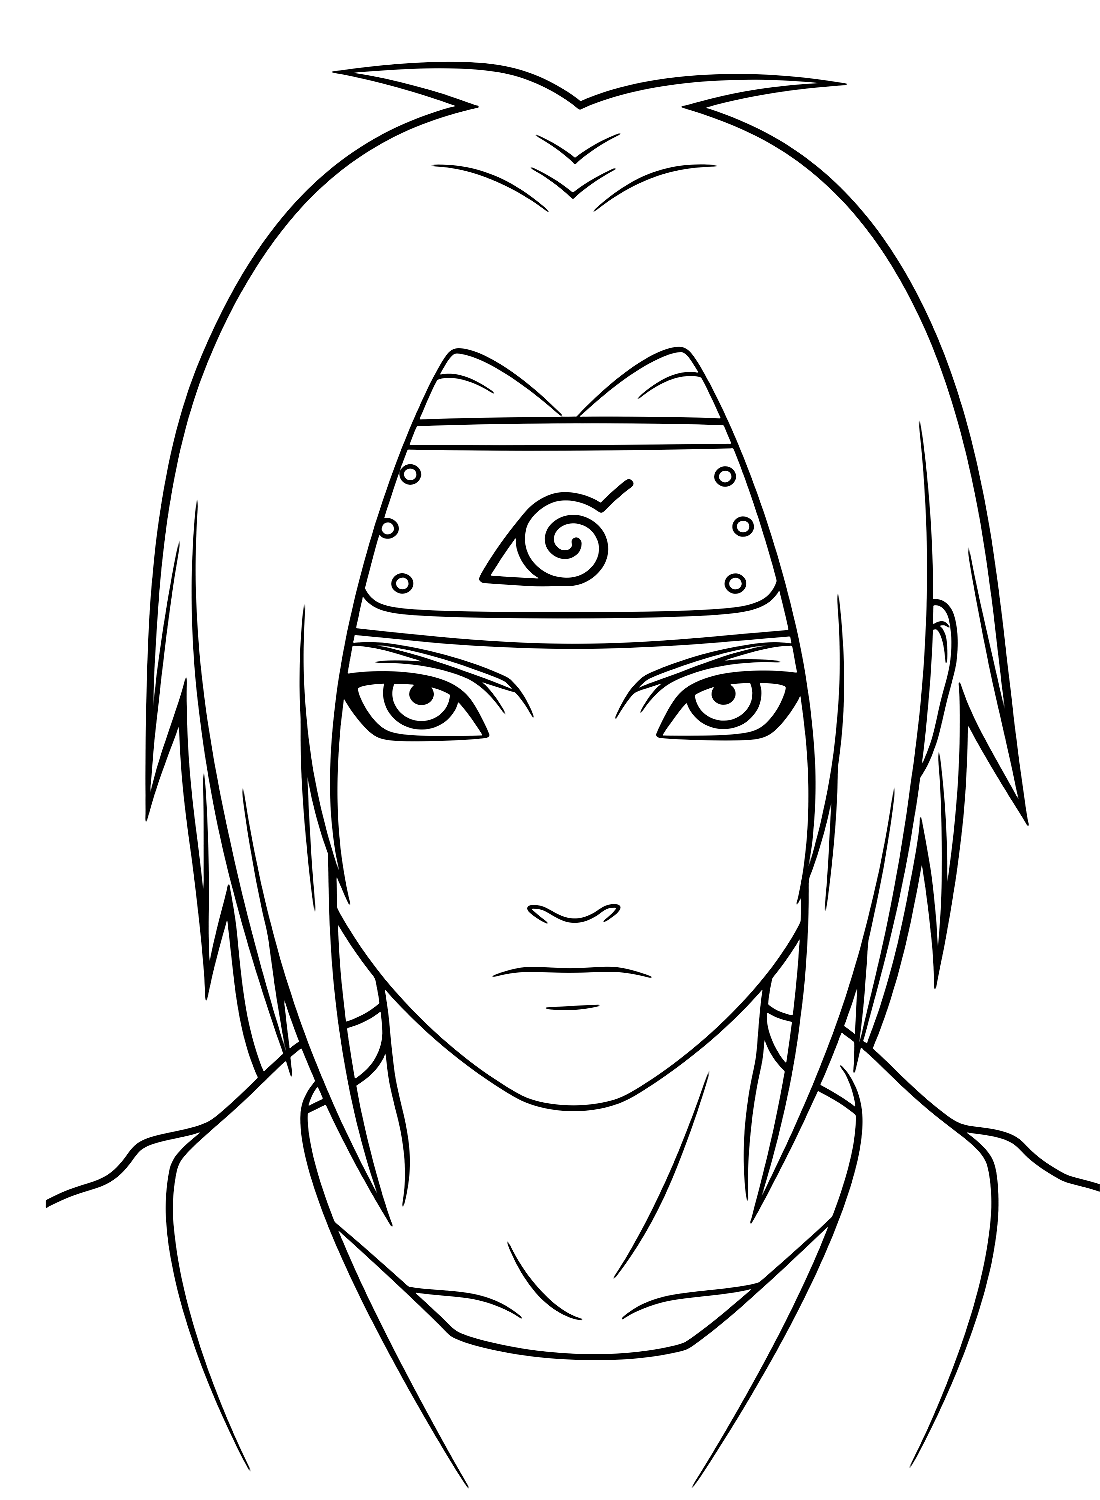 Uchiha itachi coloring pages